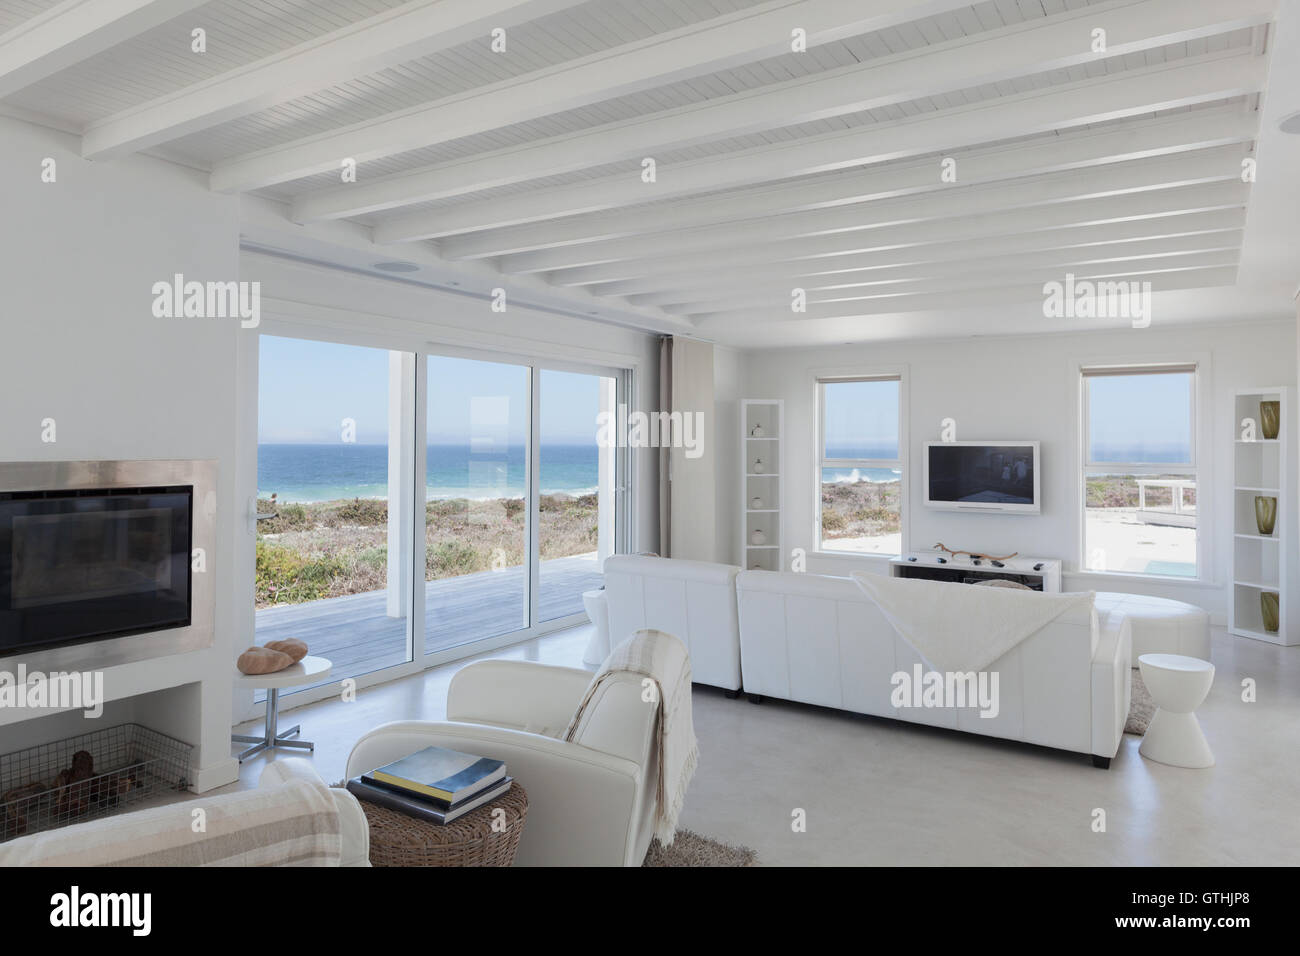 Beach house living room with wood beam ceilings Stock Photo